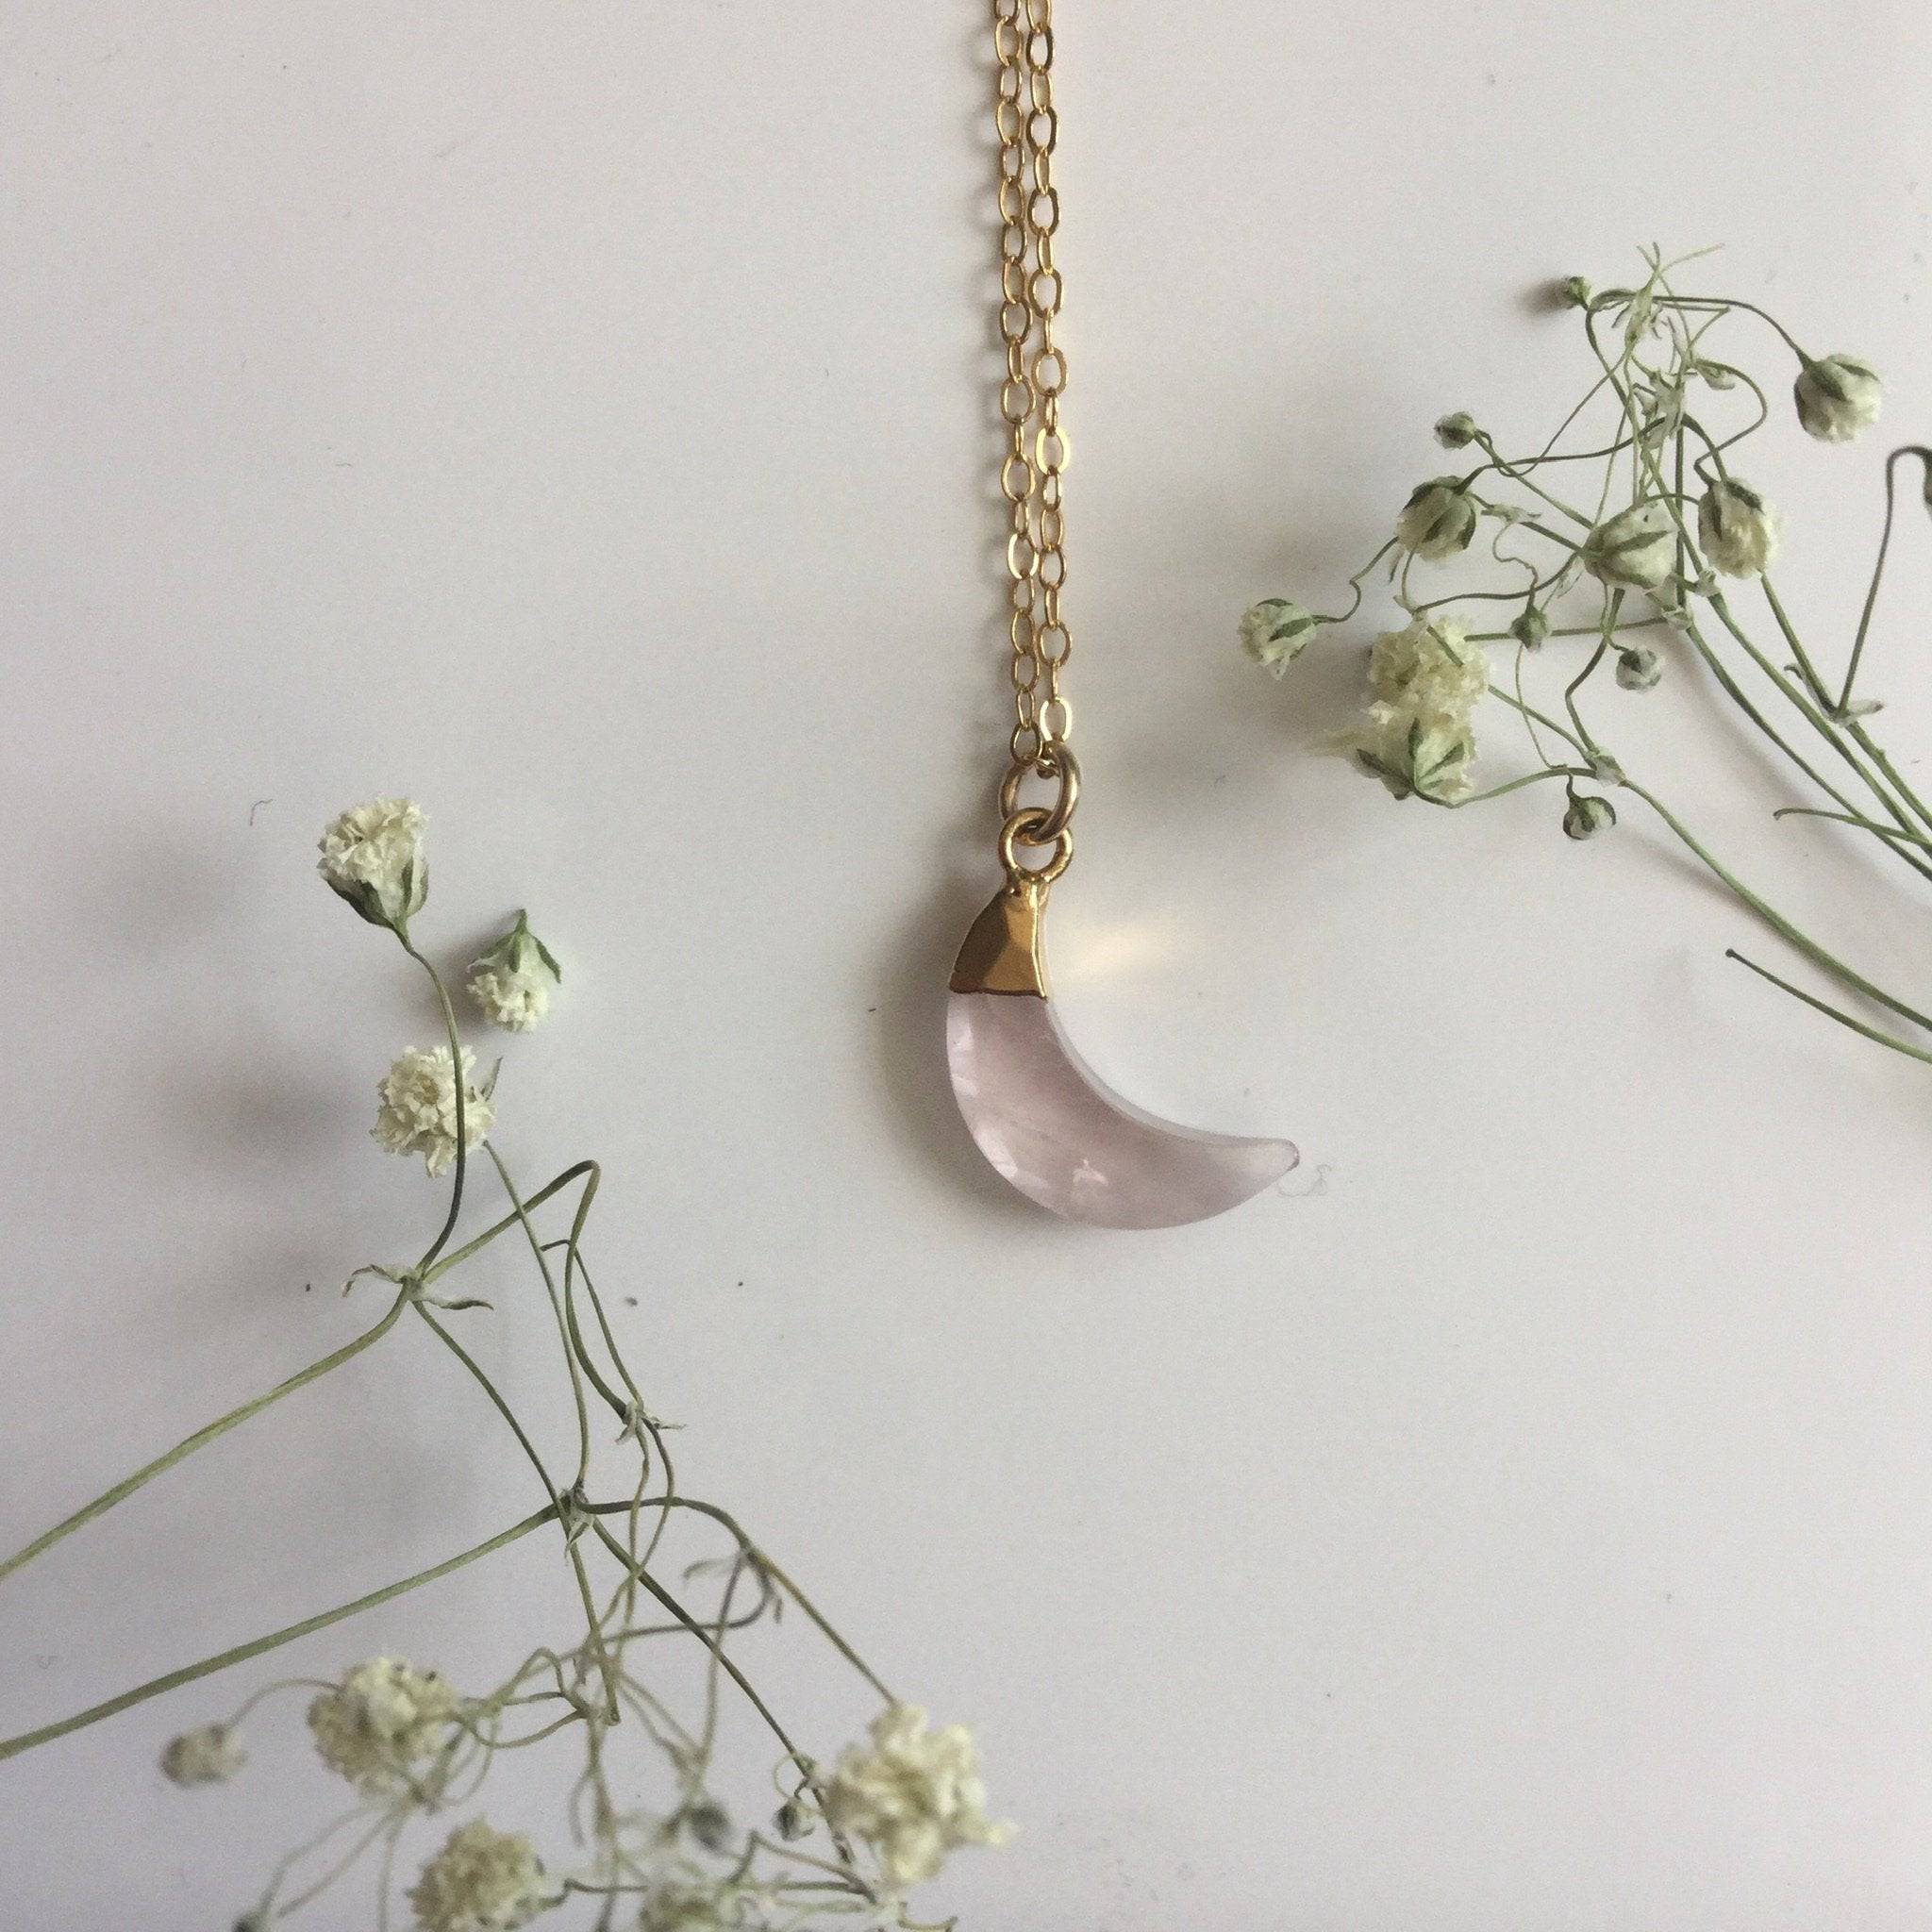 ROSE QRTZ MOON NECKLACE - Out of the Blue